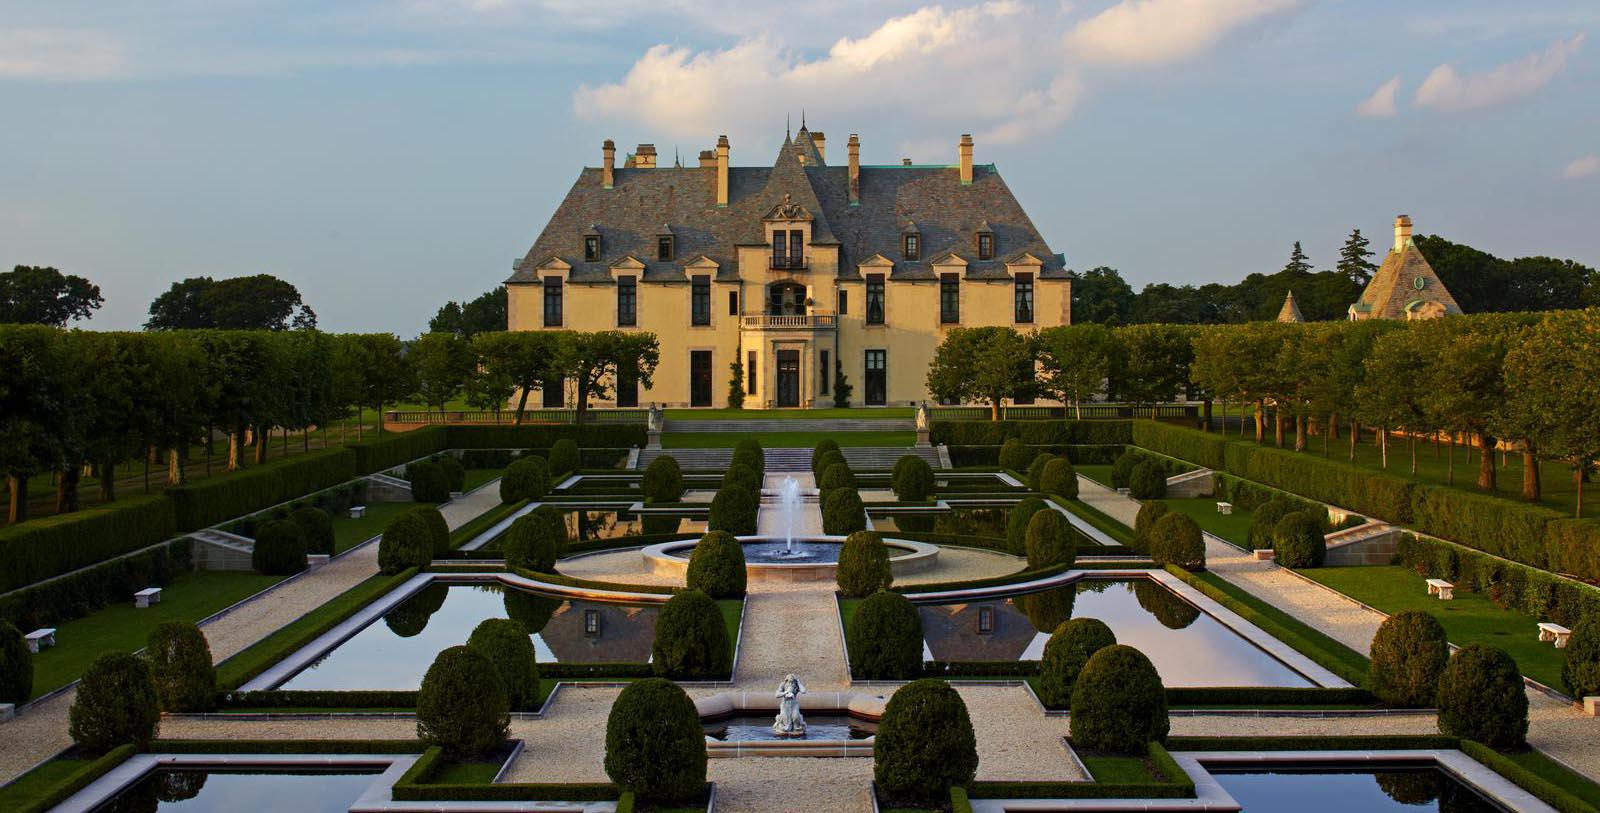 Image of Exterior & Gardens, OHEKA CASTLE, Huntington, New York, 1919, Member of Historic Hotels of America, Accommodations